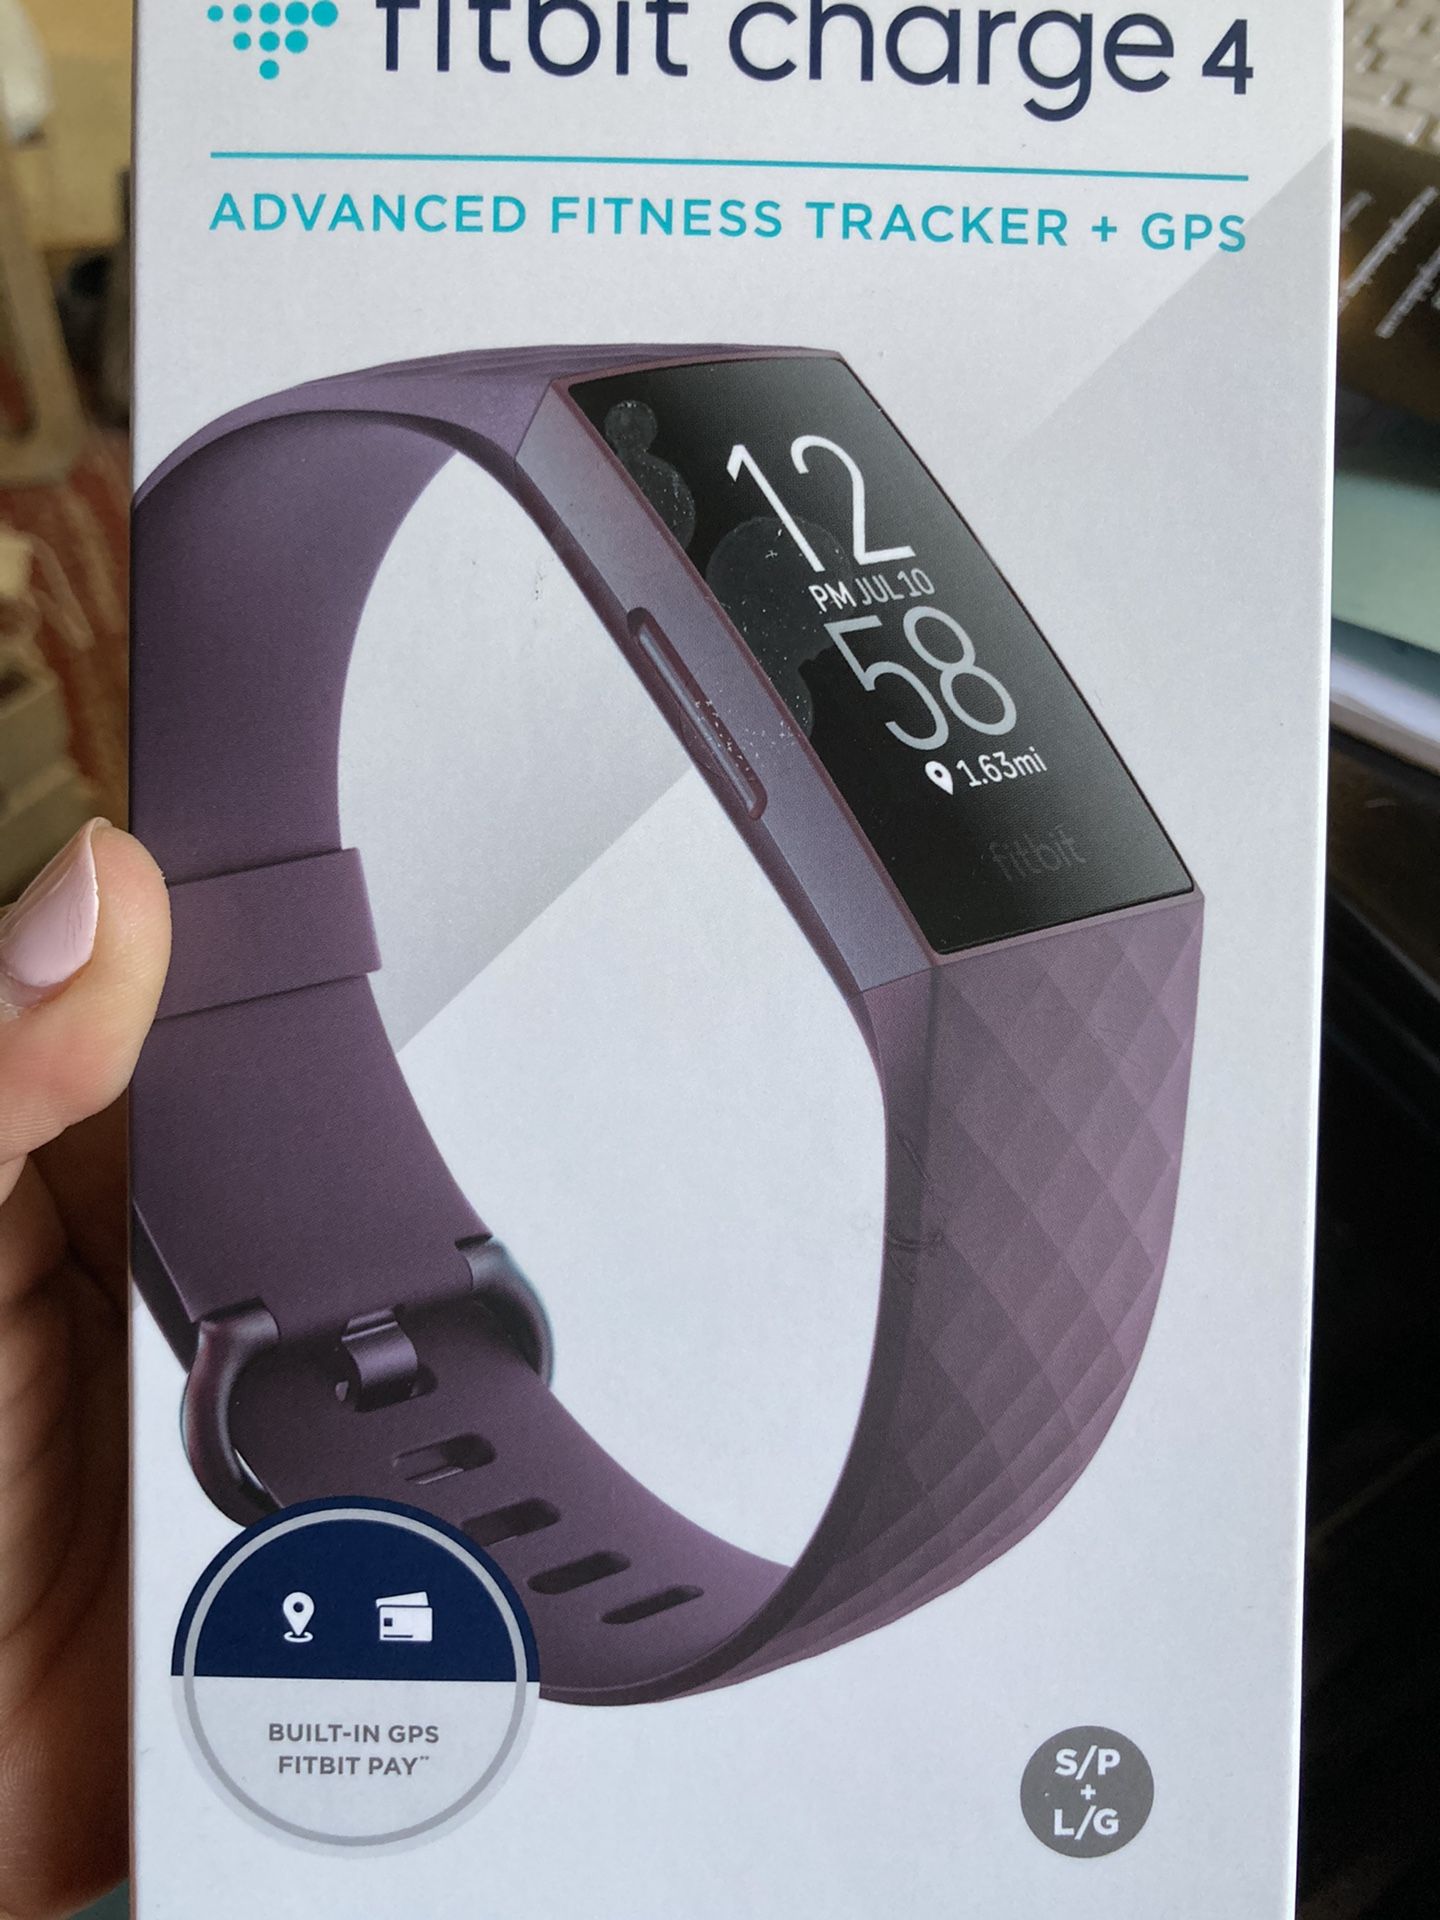 Sealed FitBit Charge 4